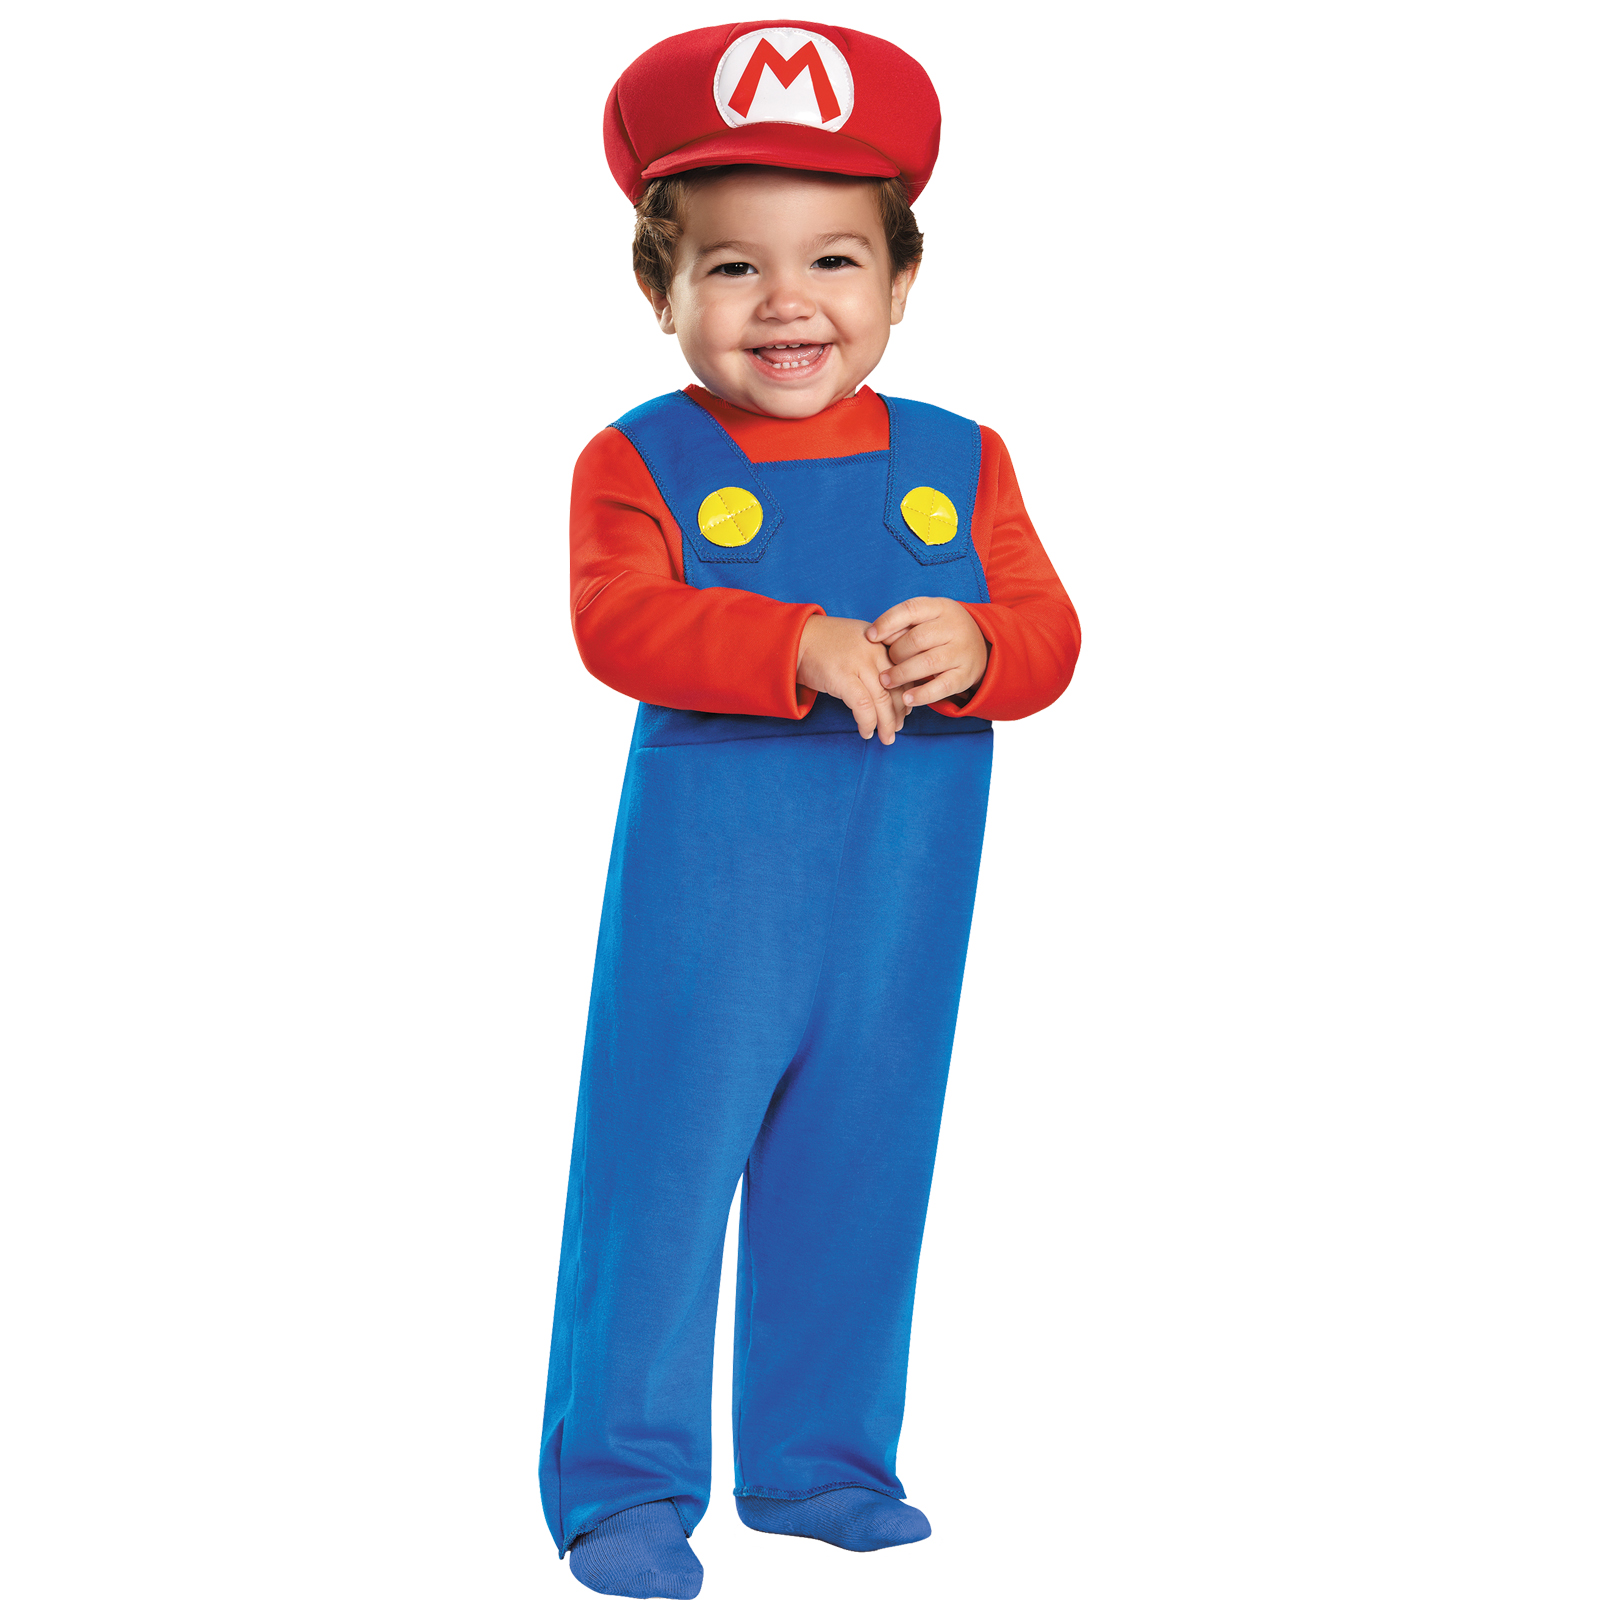 Infant Mario Costume Size: 12-18 months